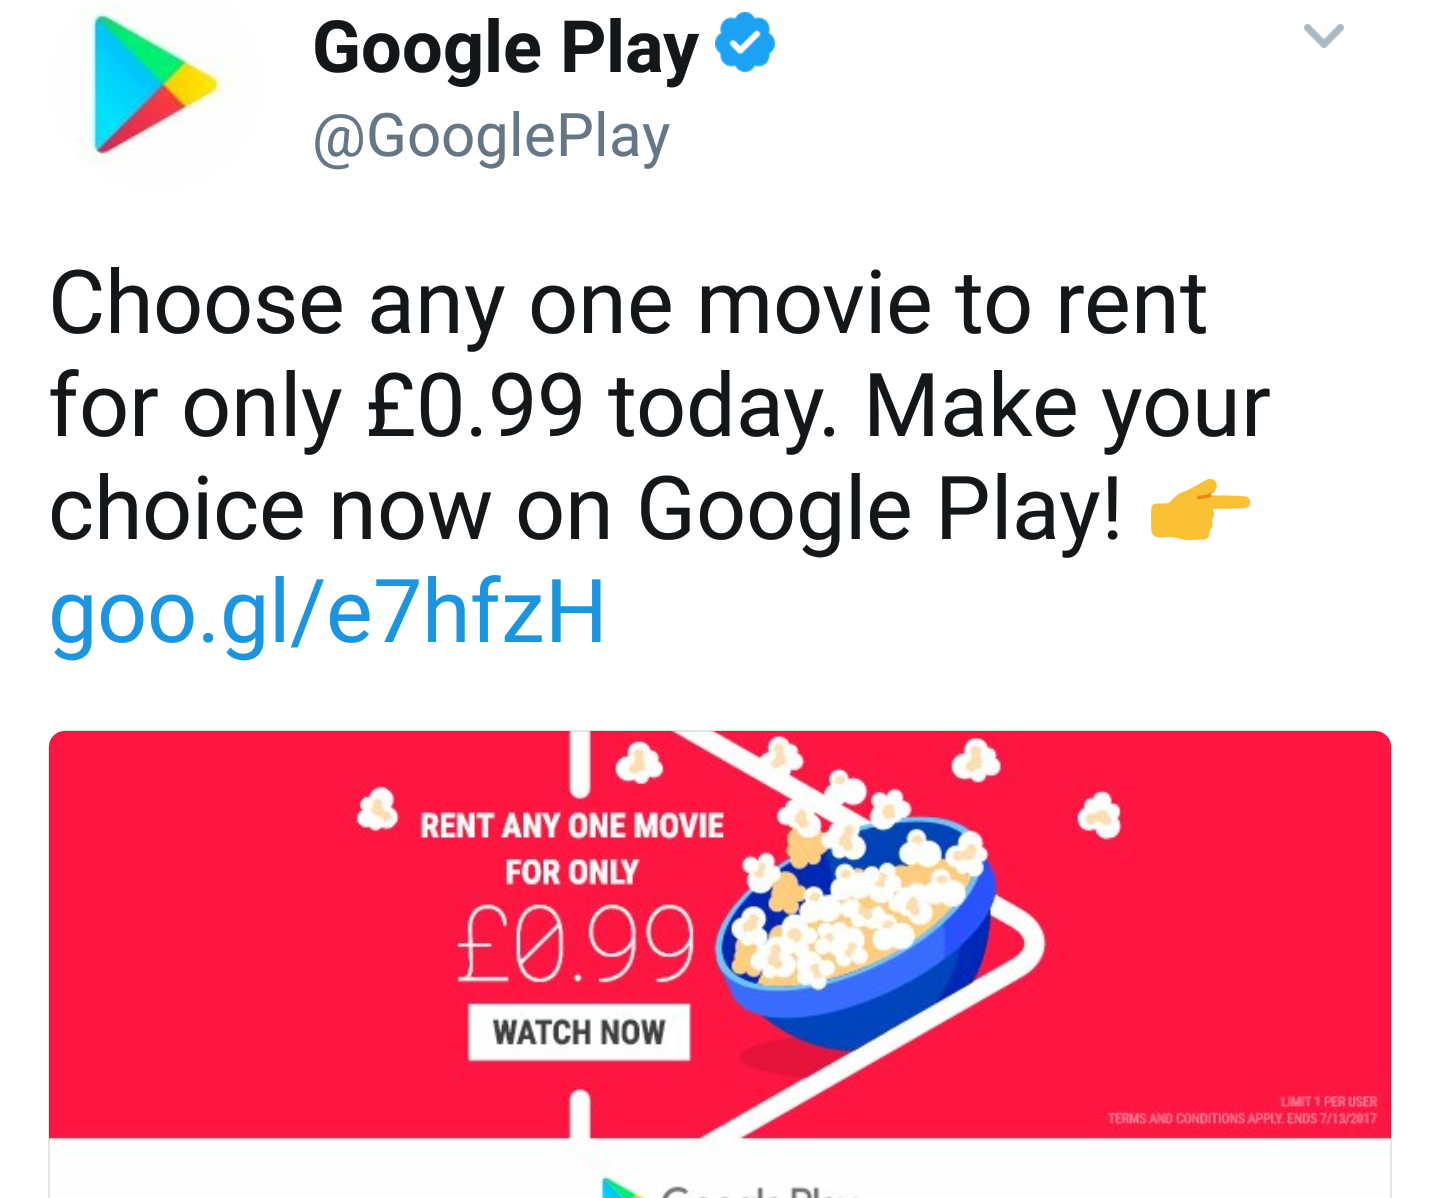 Google Play serving up a 99p movie rental